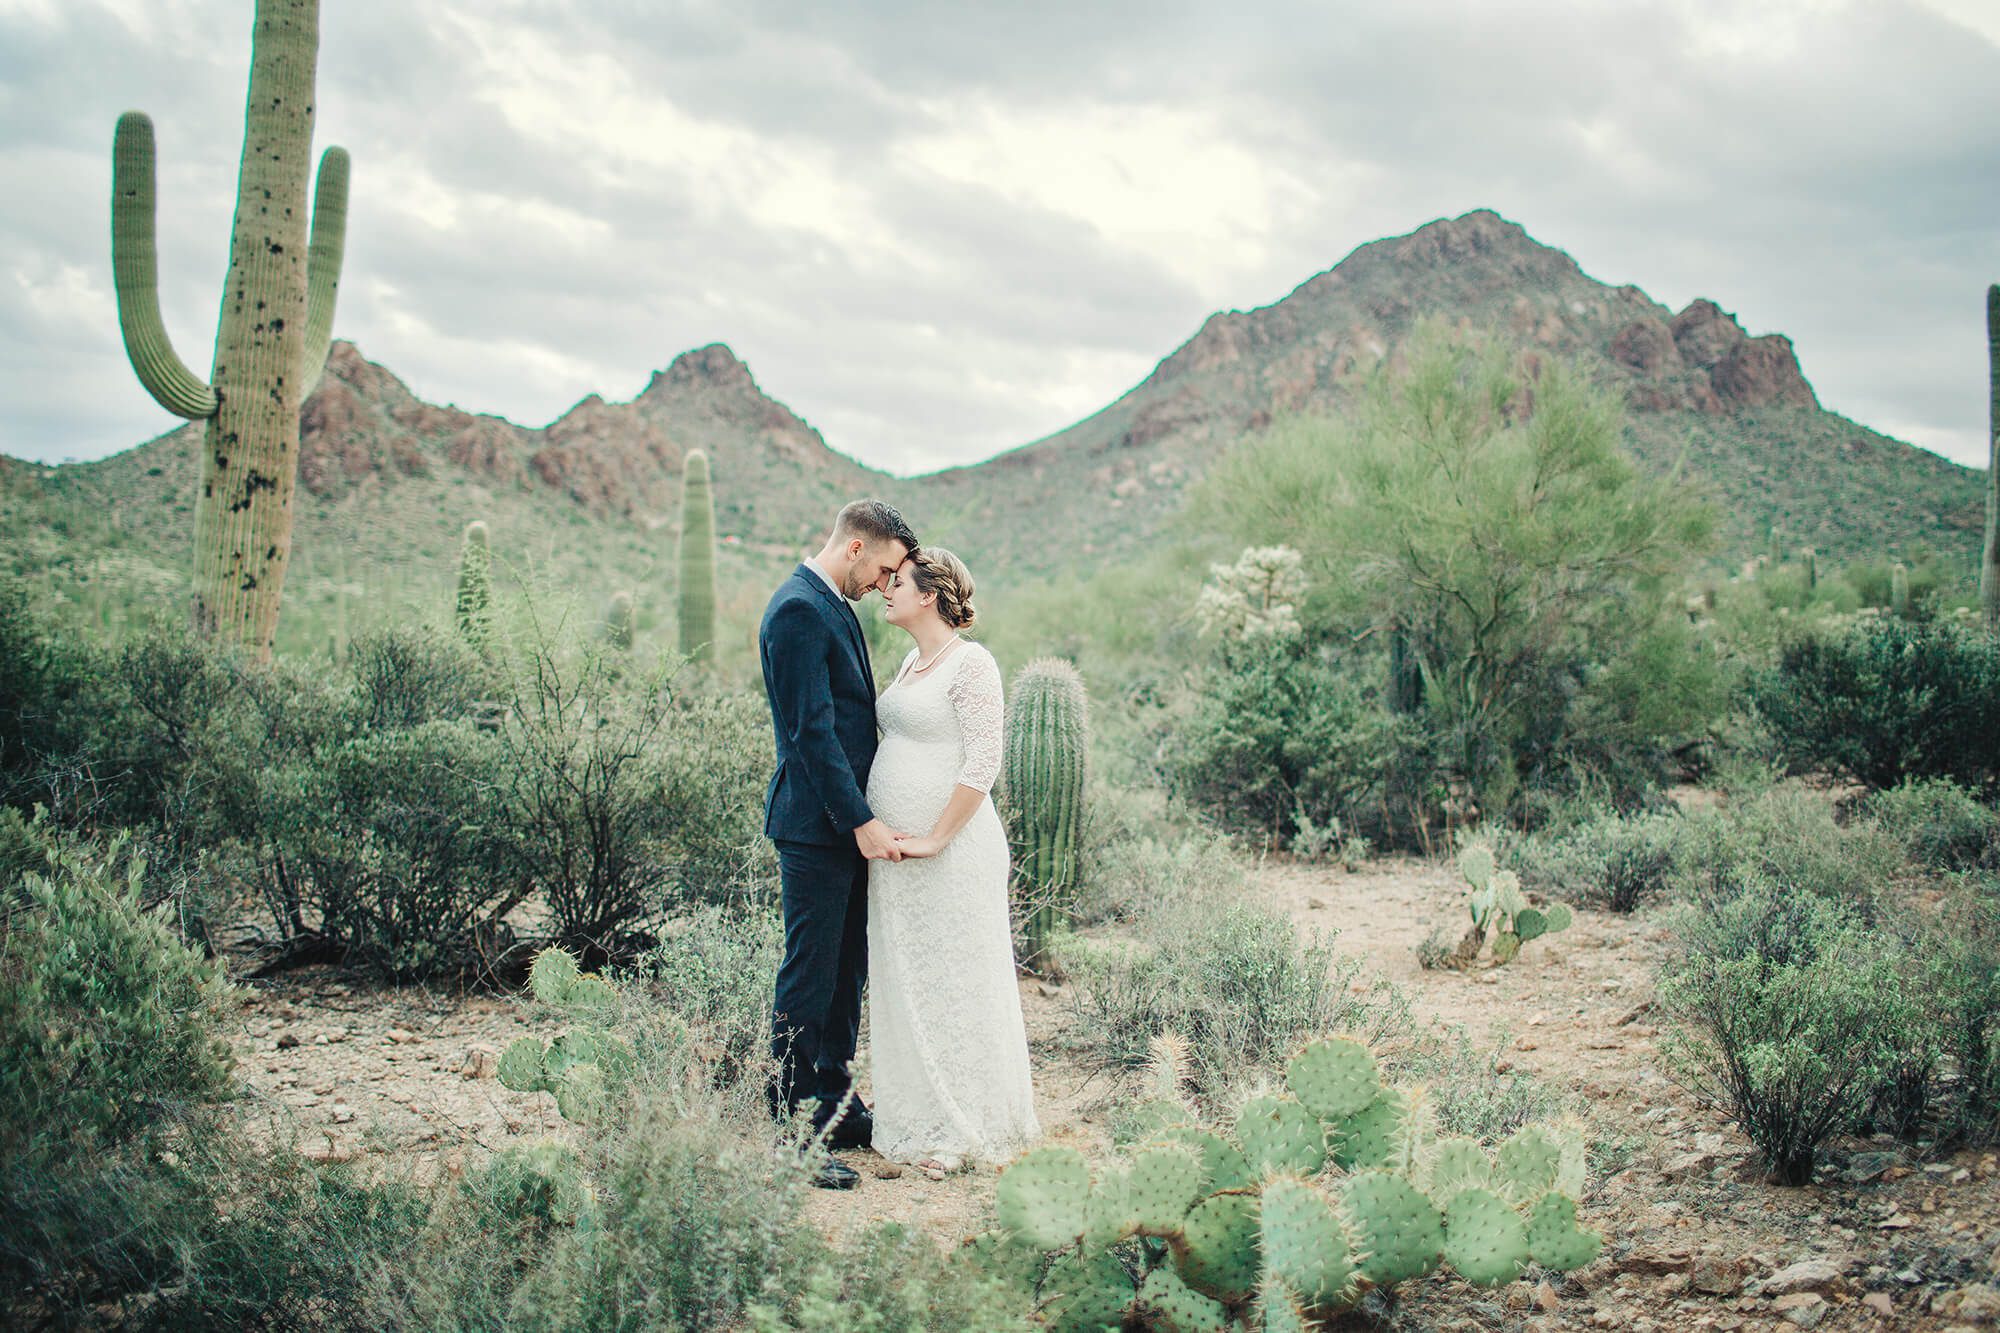 Bride and groom share a loving moment at Gate's Pass in Tucson following their desert elopement.